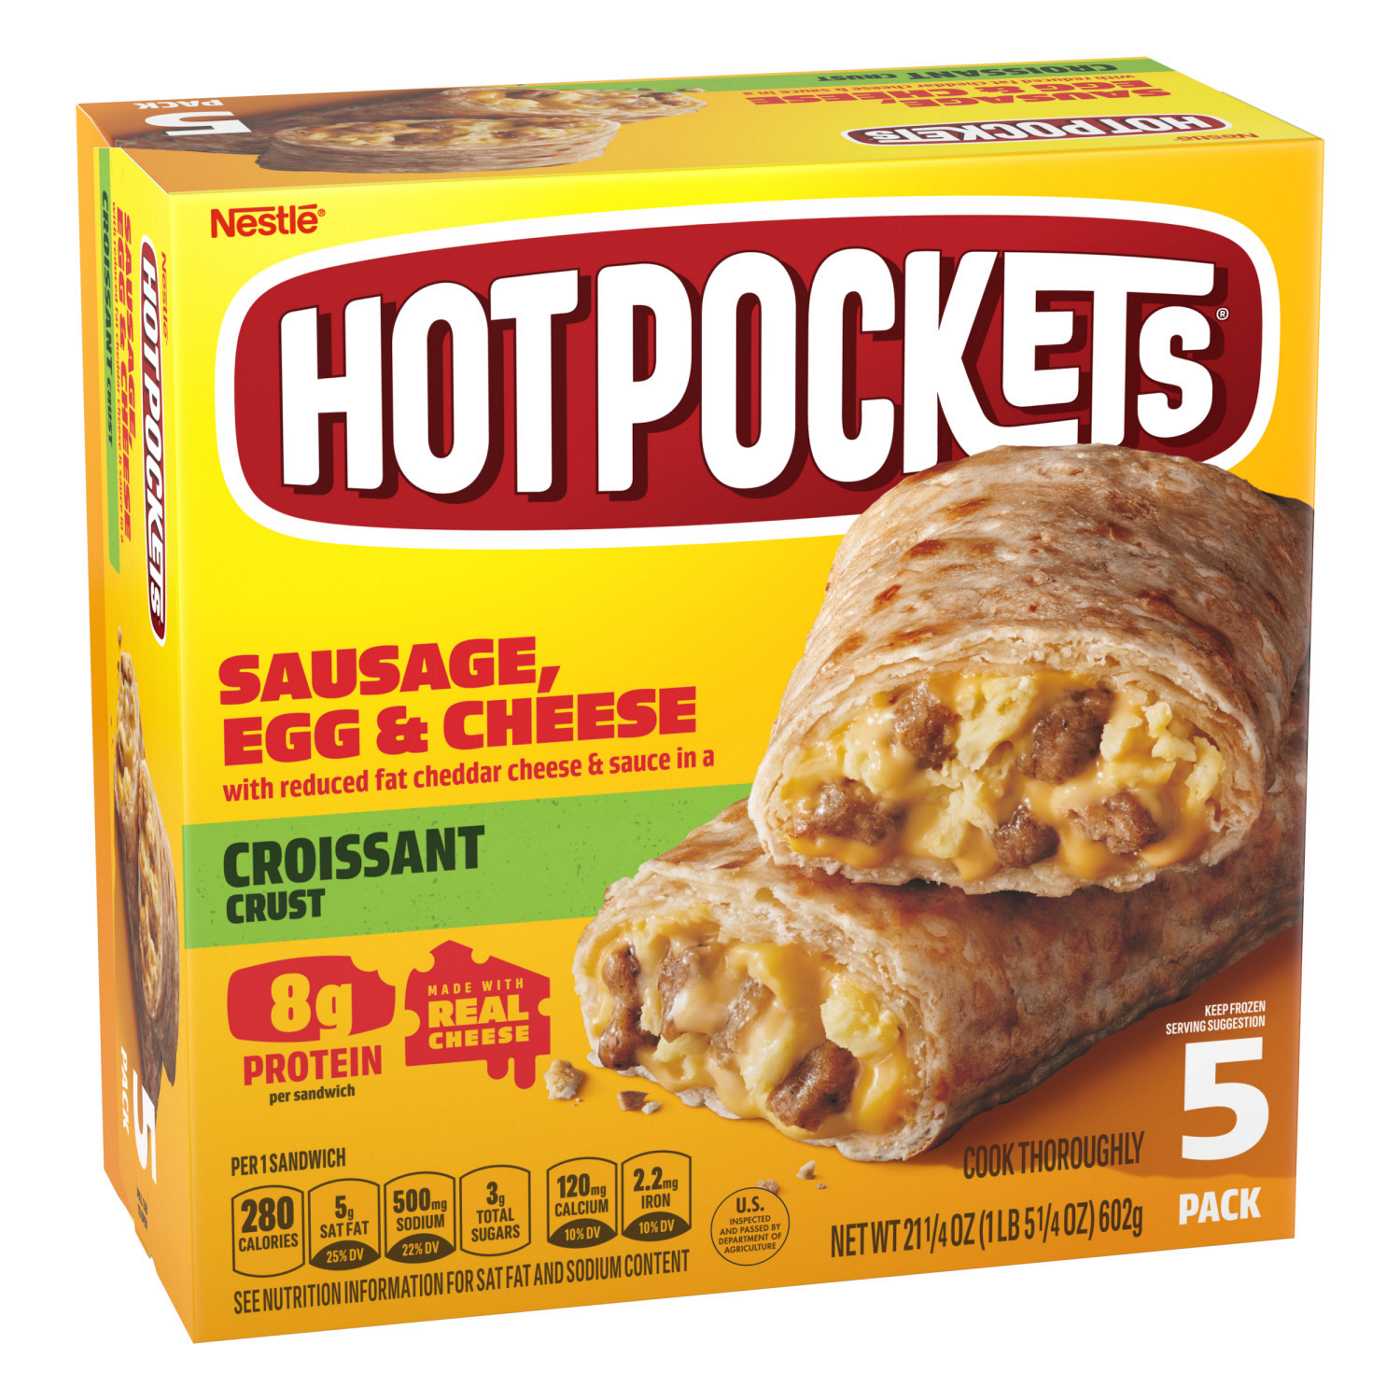 Hot Pockets Sausage Egg & Cheese Croissant Crust Frozen Sandwiches; image 7 of 8